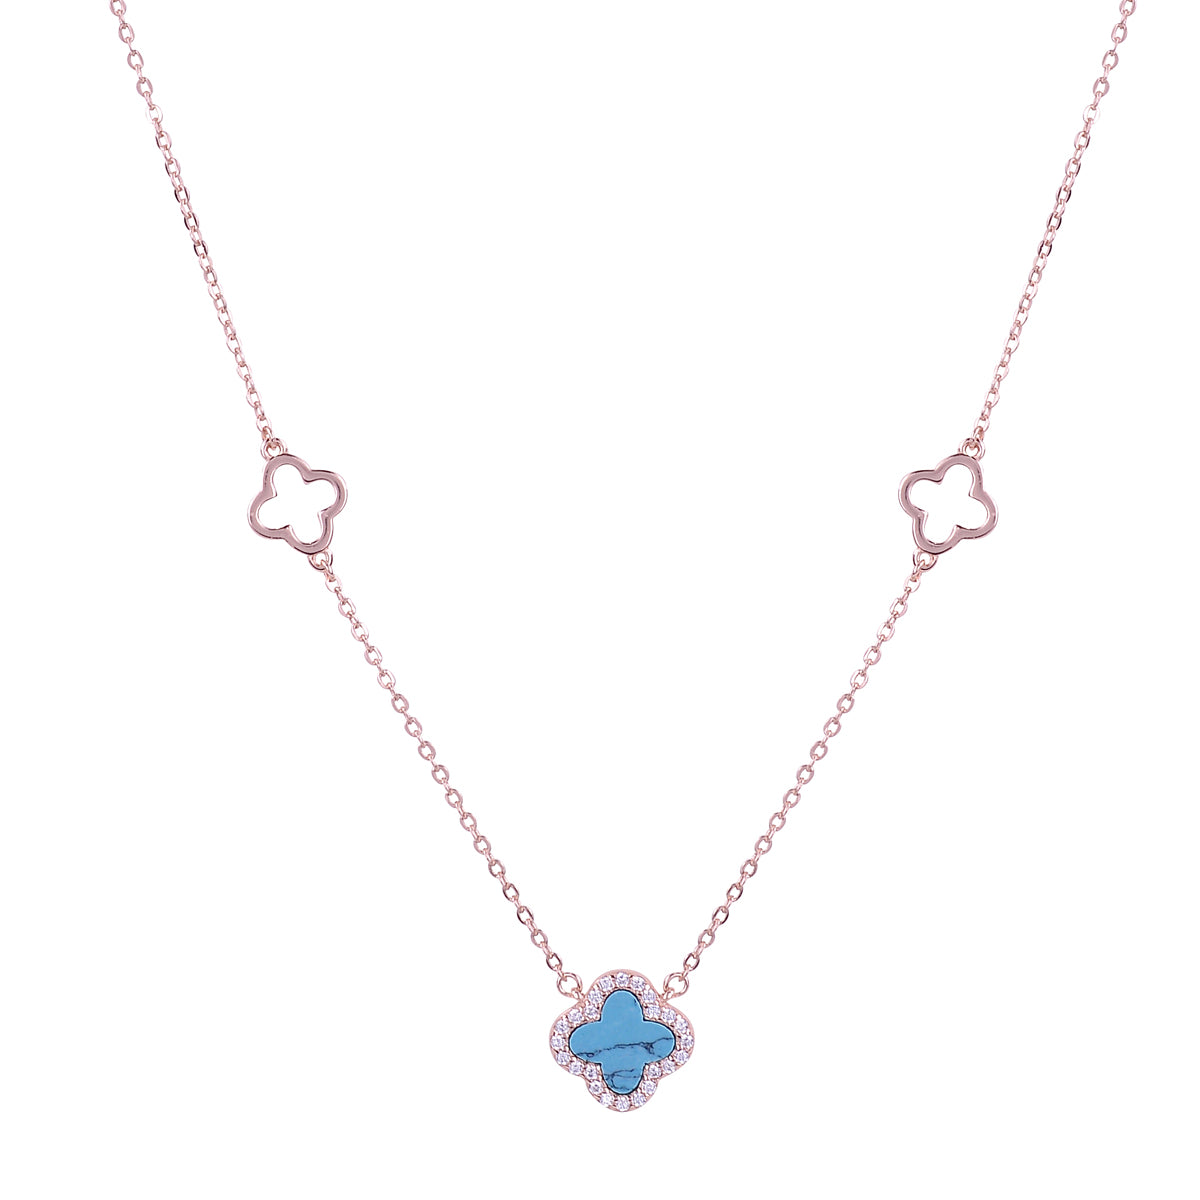 ARABELLA TURQUOISE CLOVER ROSE GOLD NECKLACE